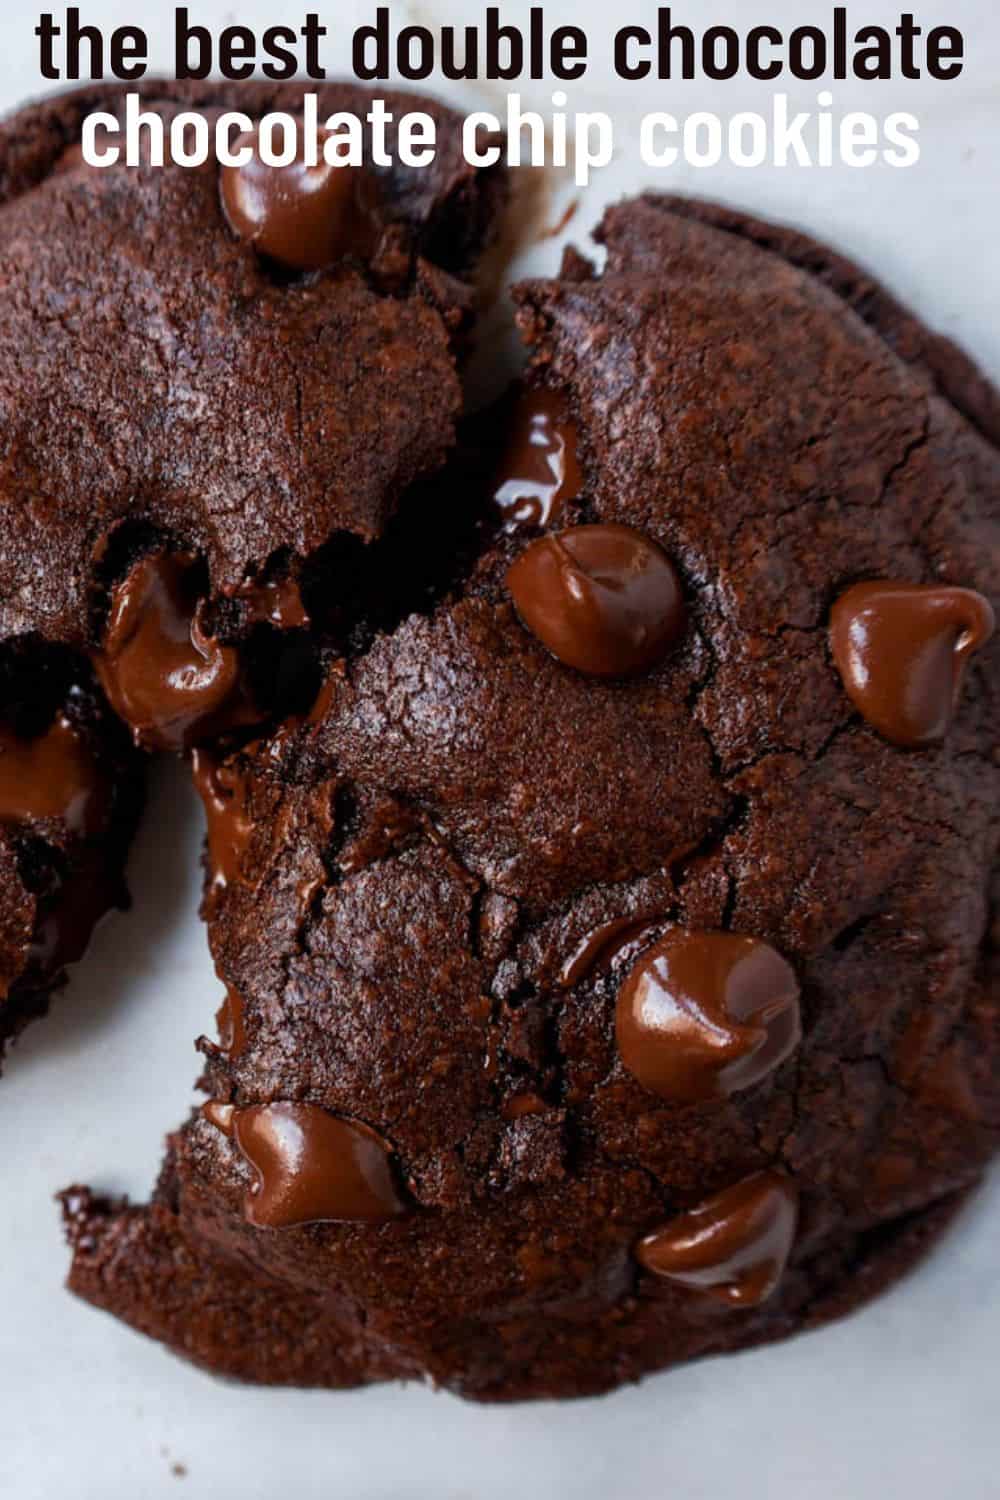 A double chocolate chip cookie split in half with melty chocolate. How to make the best double chocolate chip cookies.